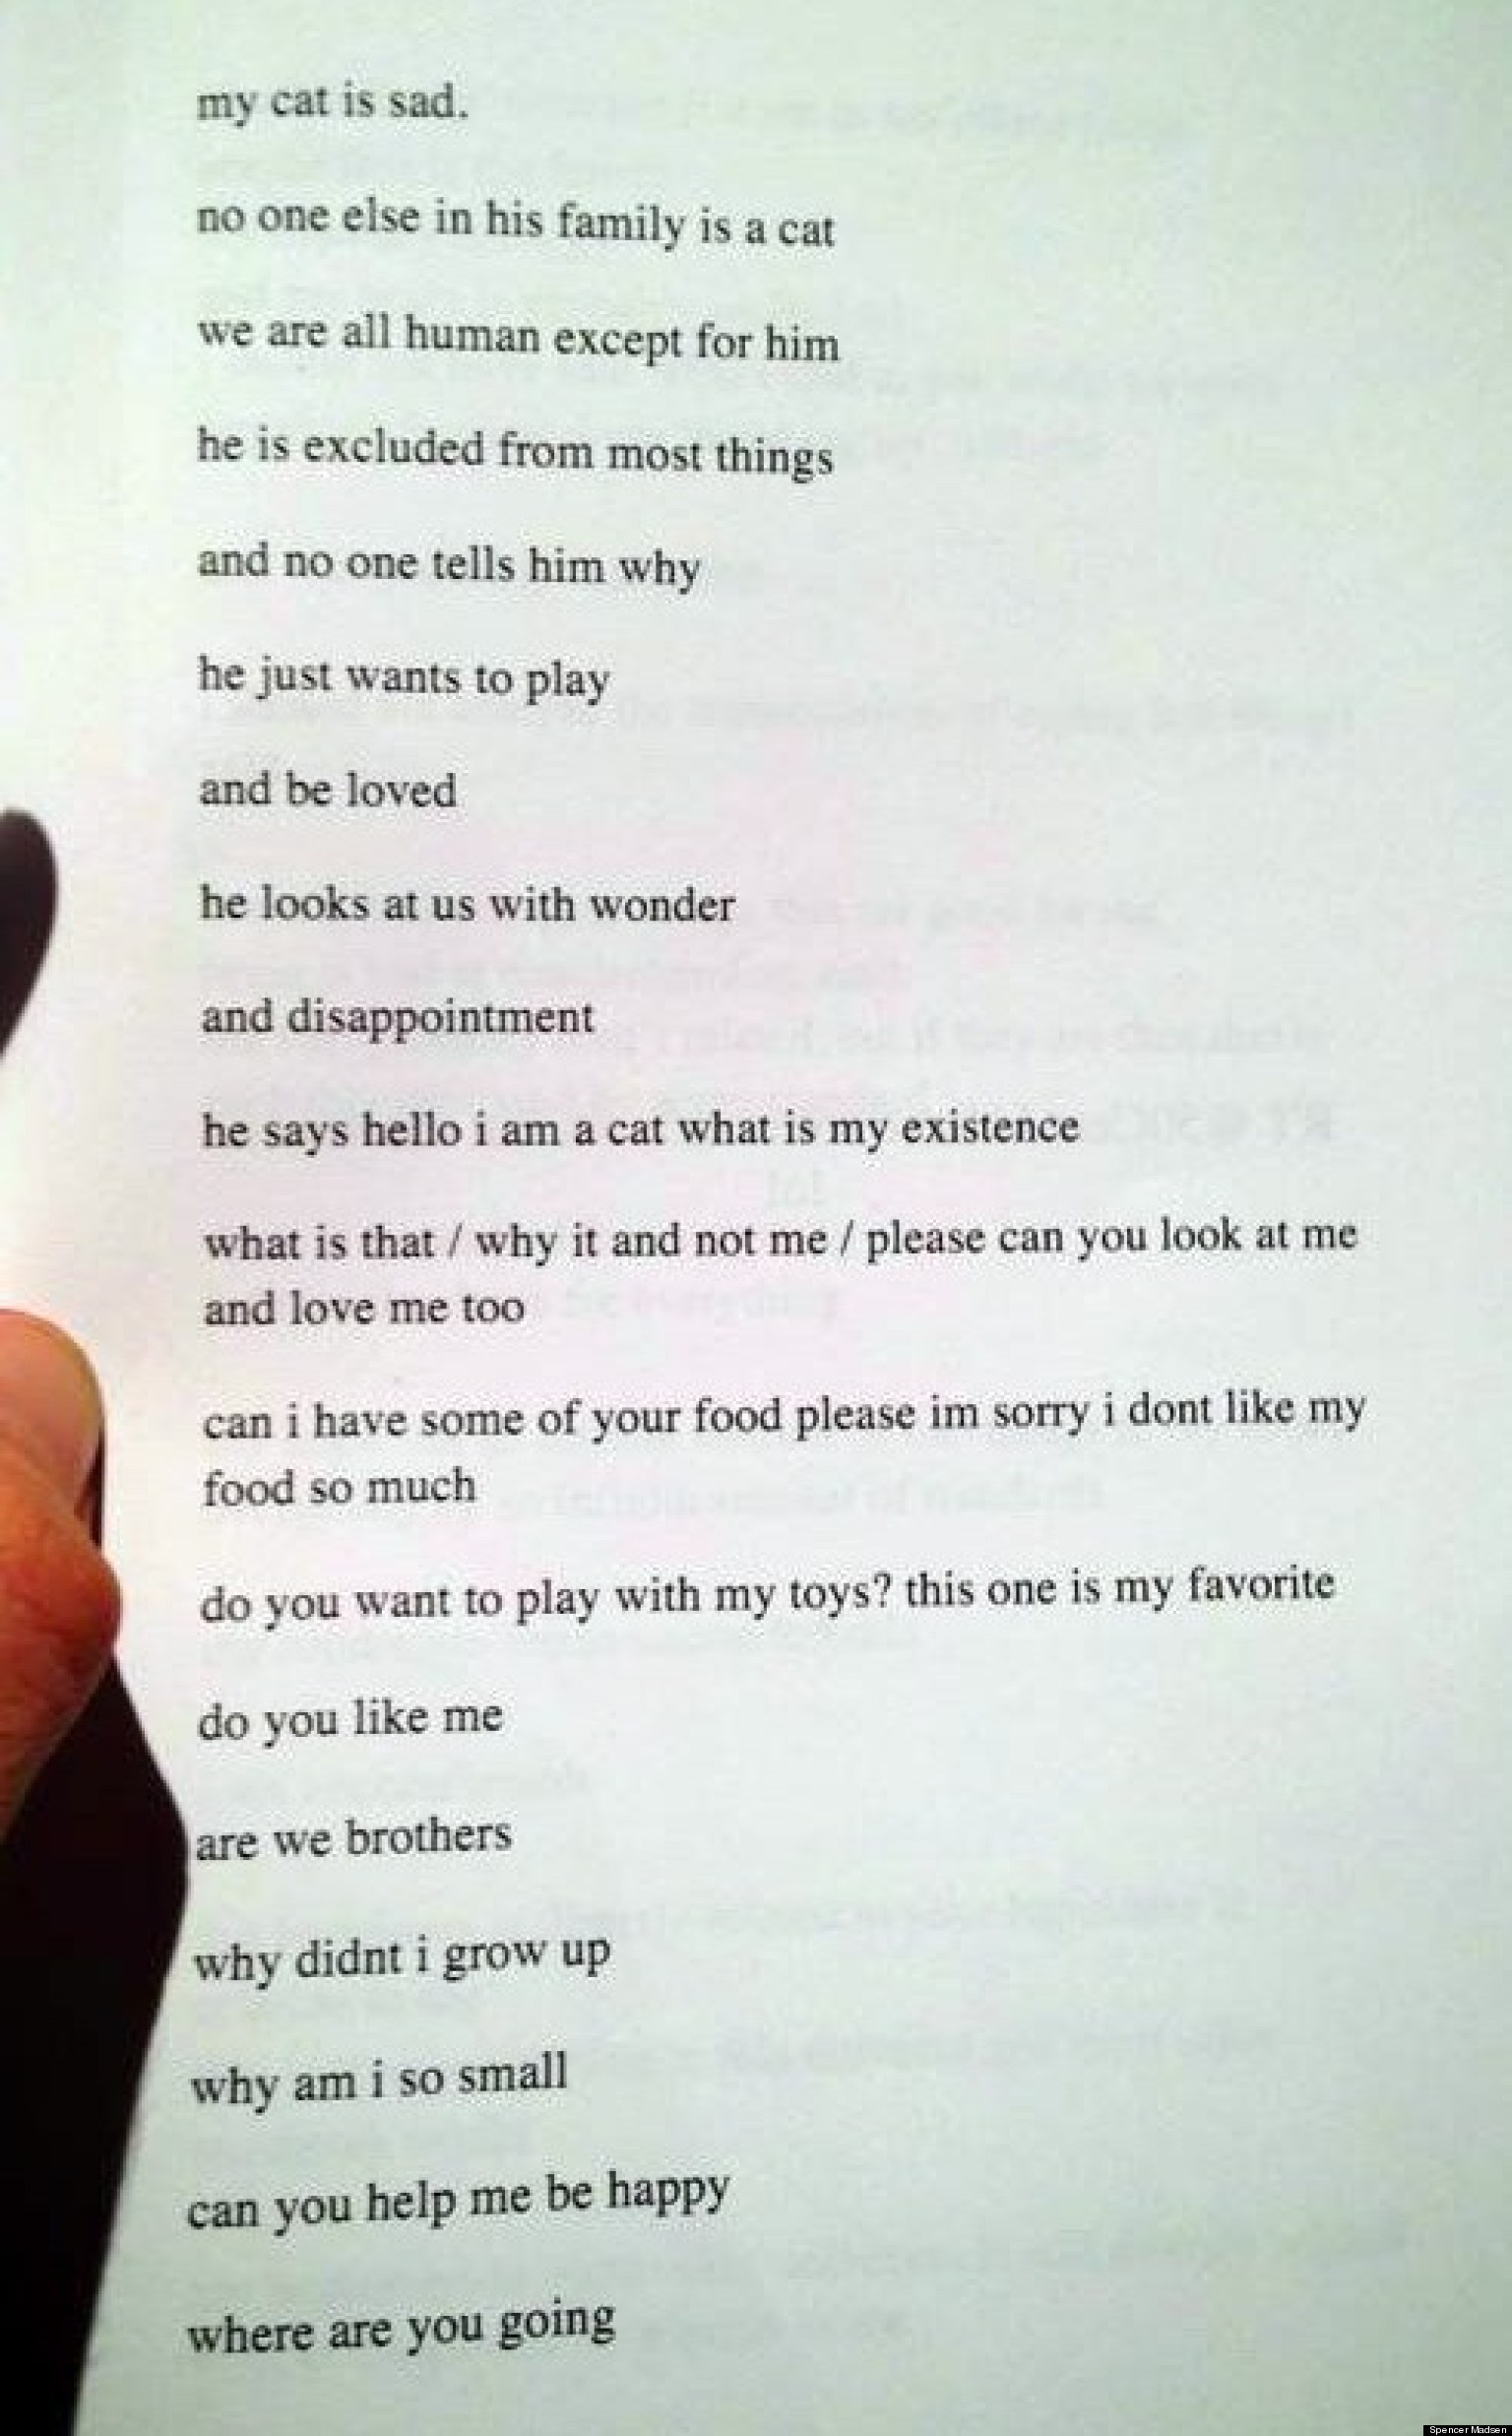 Sad Cat Poem Will Make You Laugh And Cry Simultaneously PHOTO